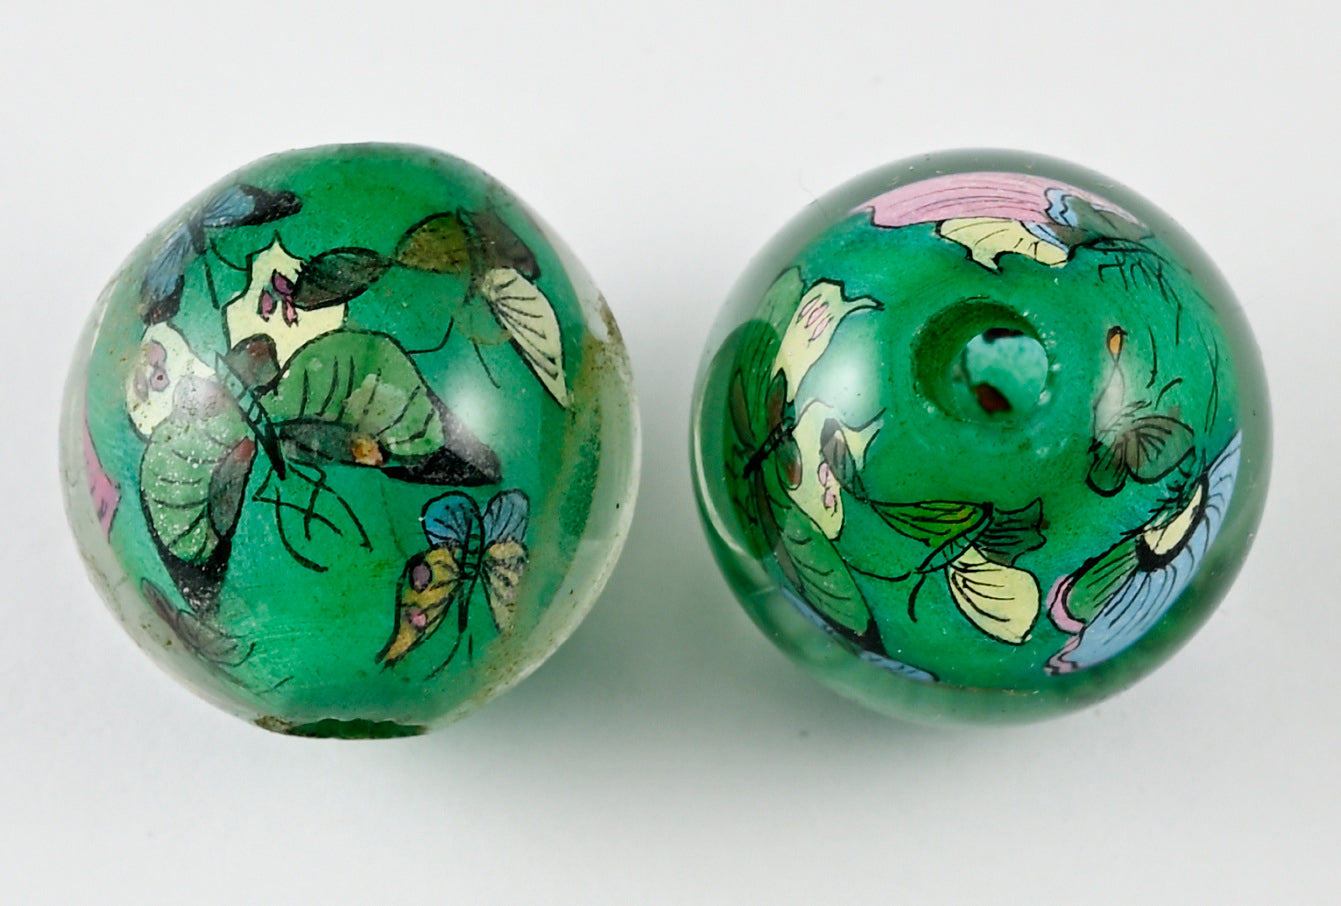 Butterfly Reverse Painted Glass Beads Butterflies - 5 Colors